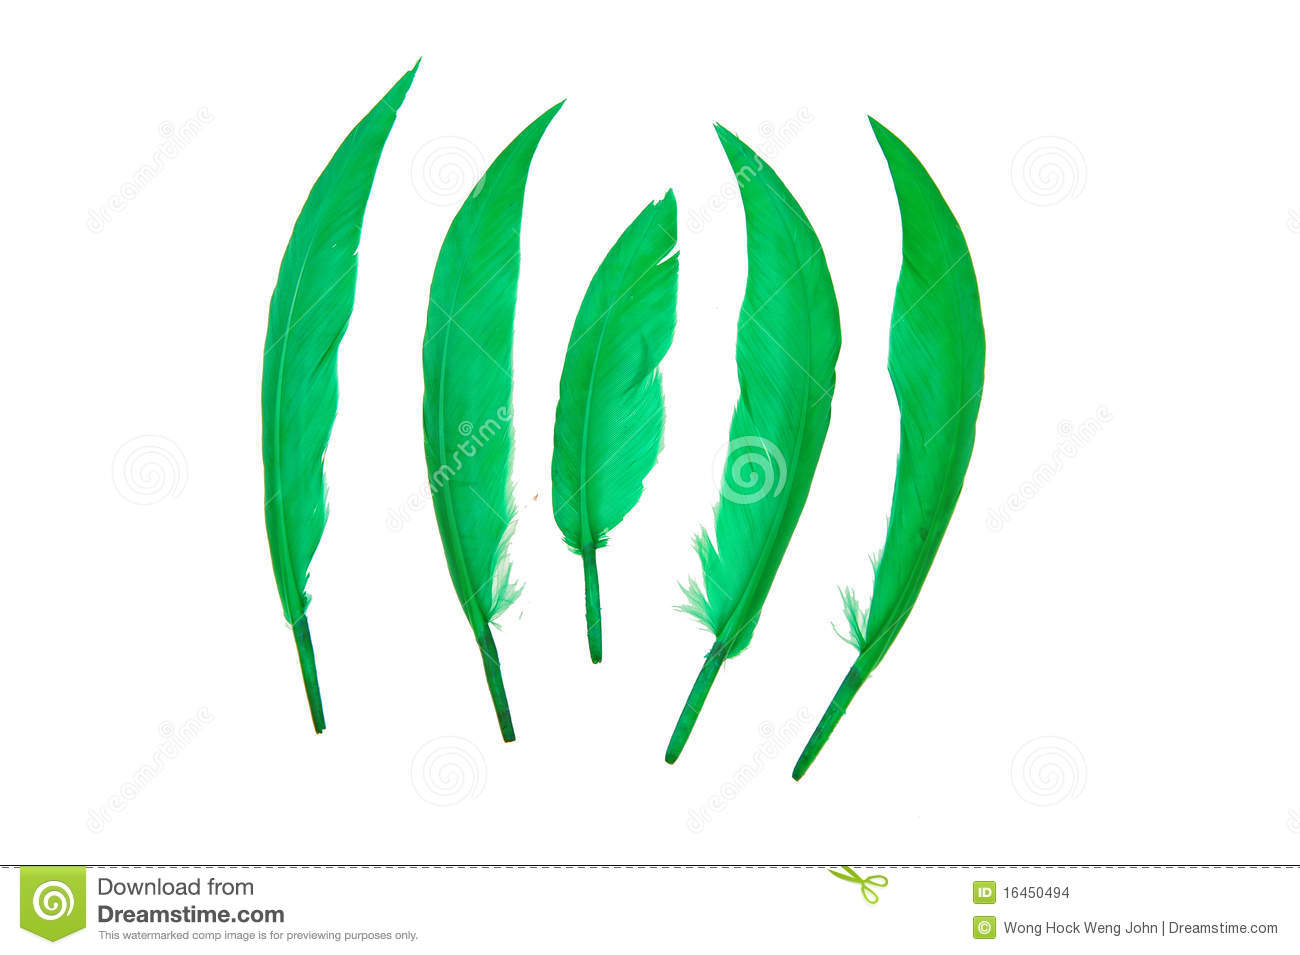 Green Bird Feather Stock Images   Image  16450494